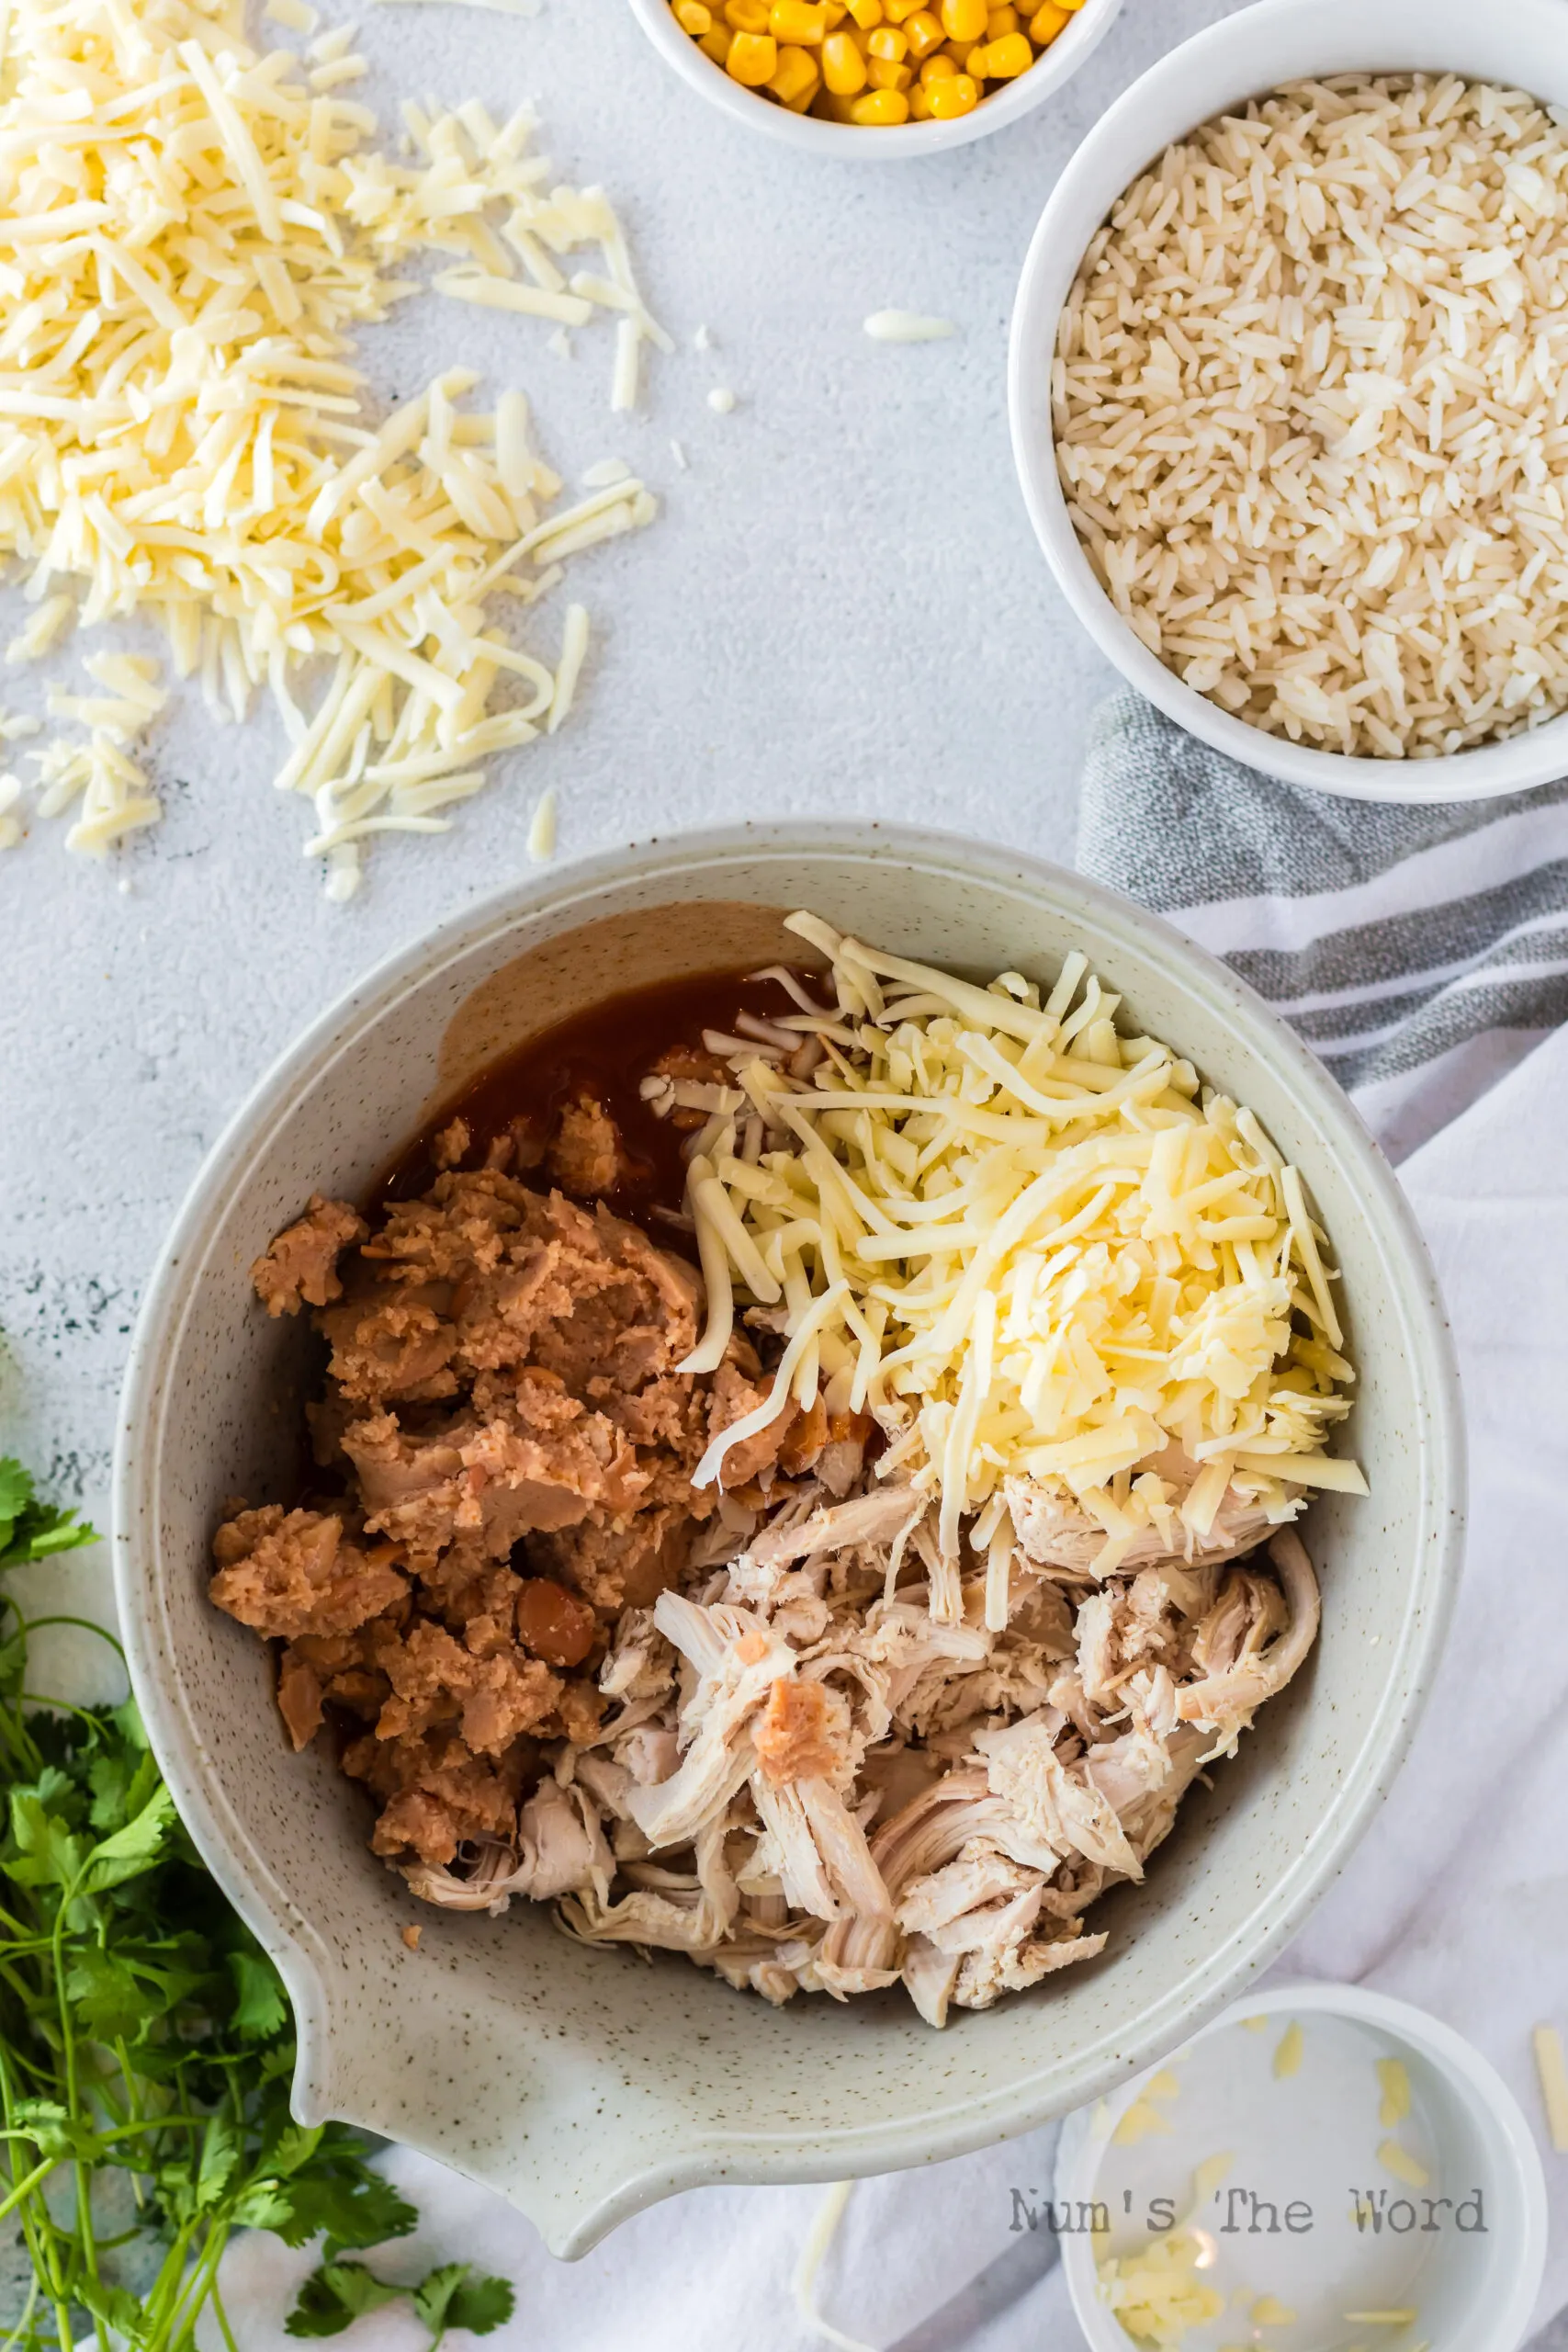 Shredded chicken, refried beans, and cheese in a bowl